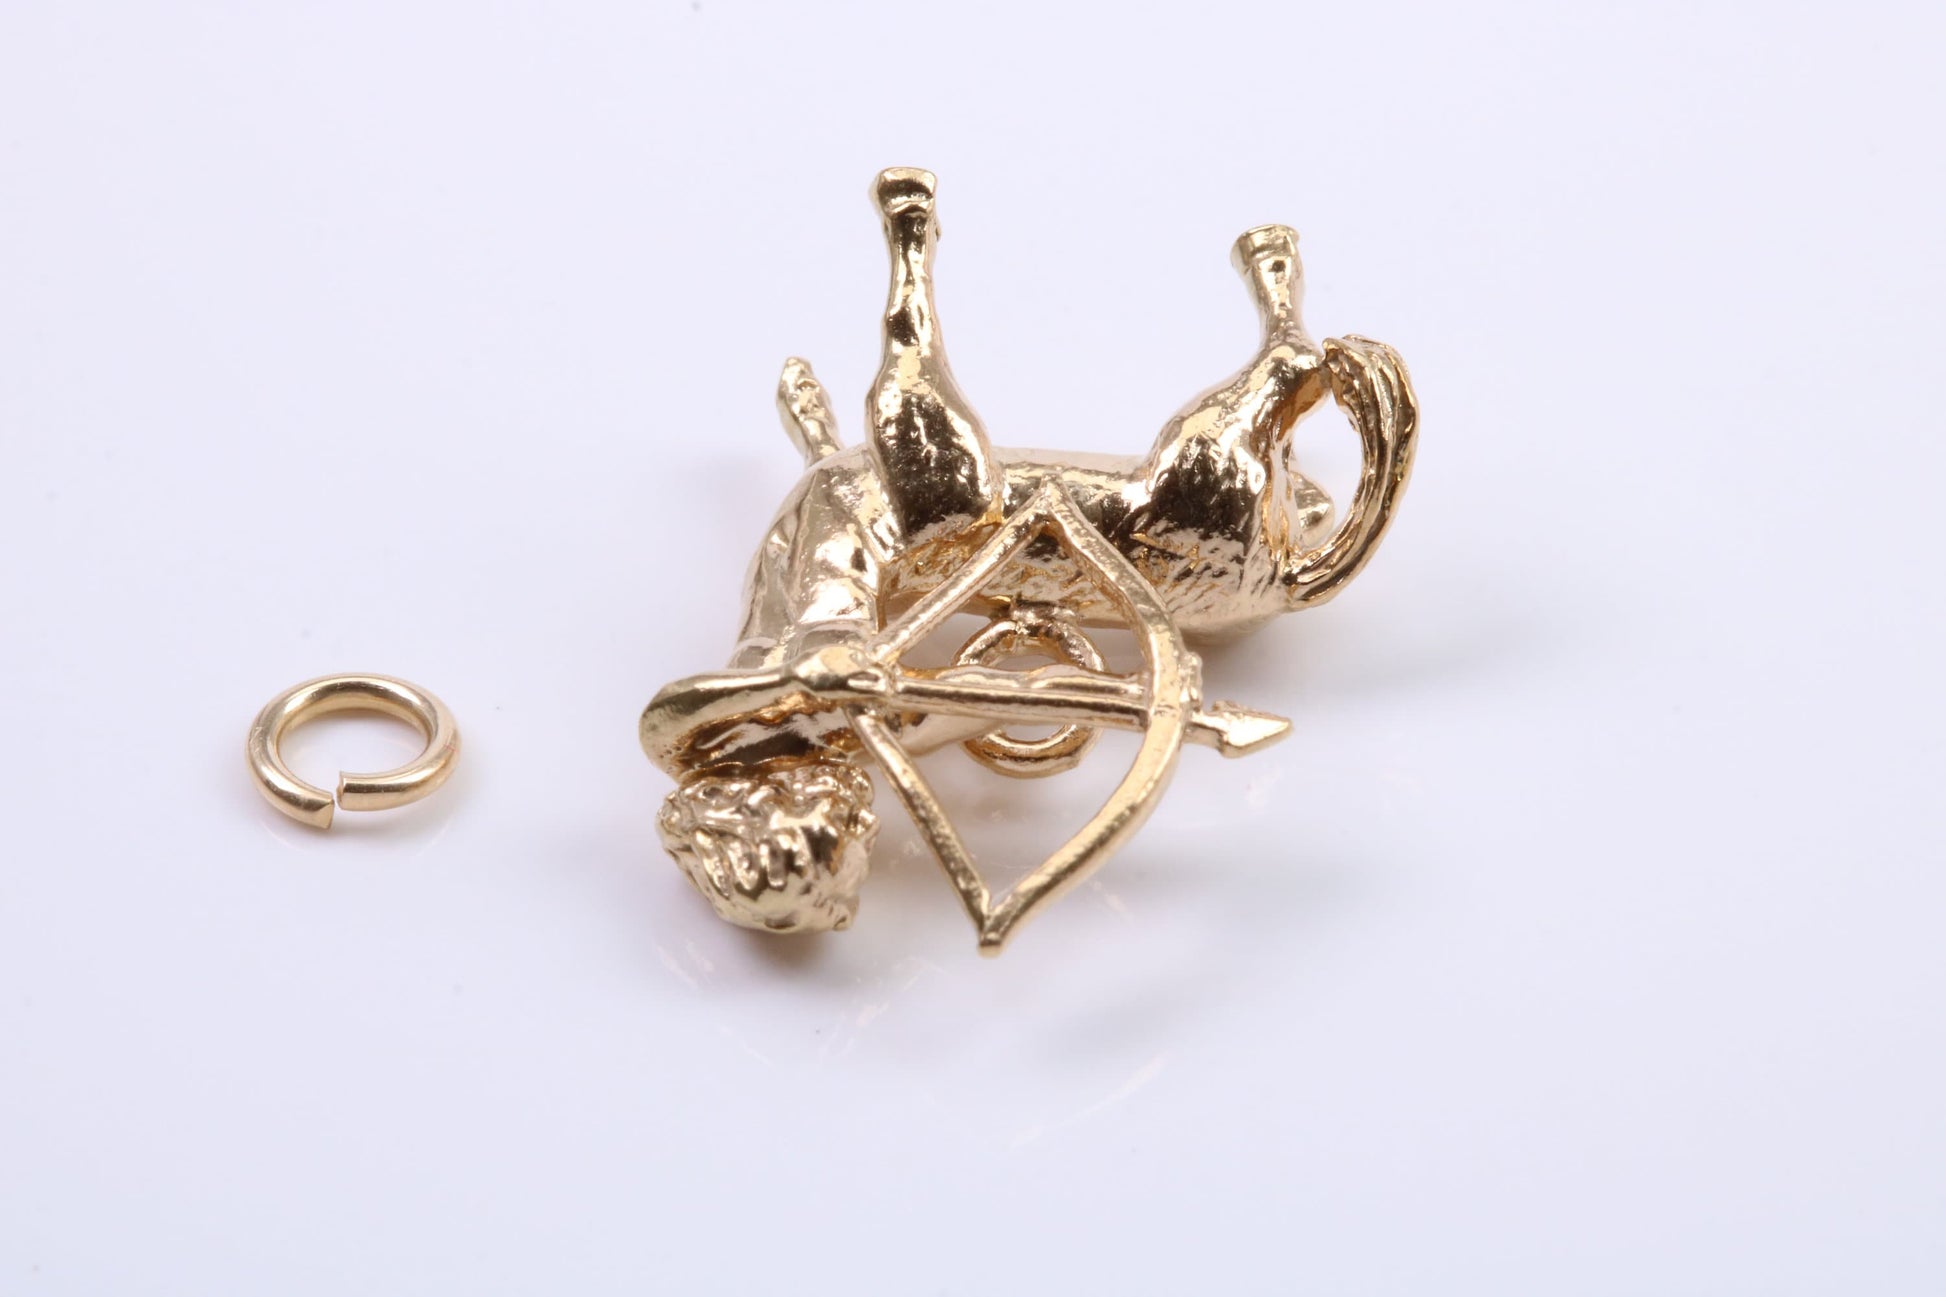 Sagittarius Zodiac Sign Charm, Traditional Charm, Made from Solid 9ct Yellow Gold, British Hallmarked, Complete with Attachment Link